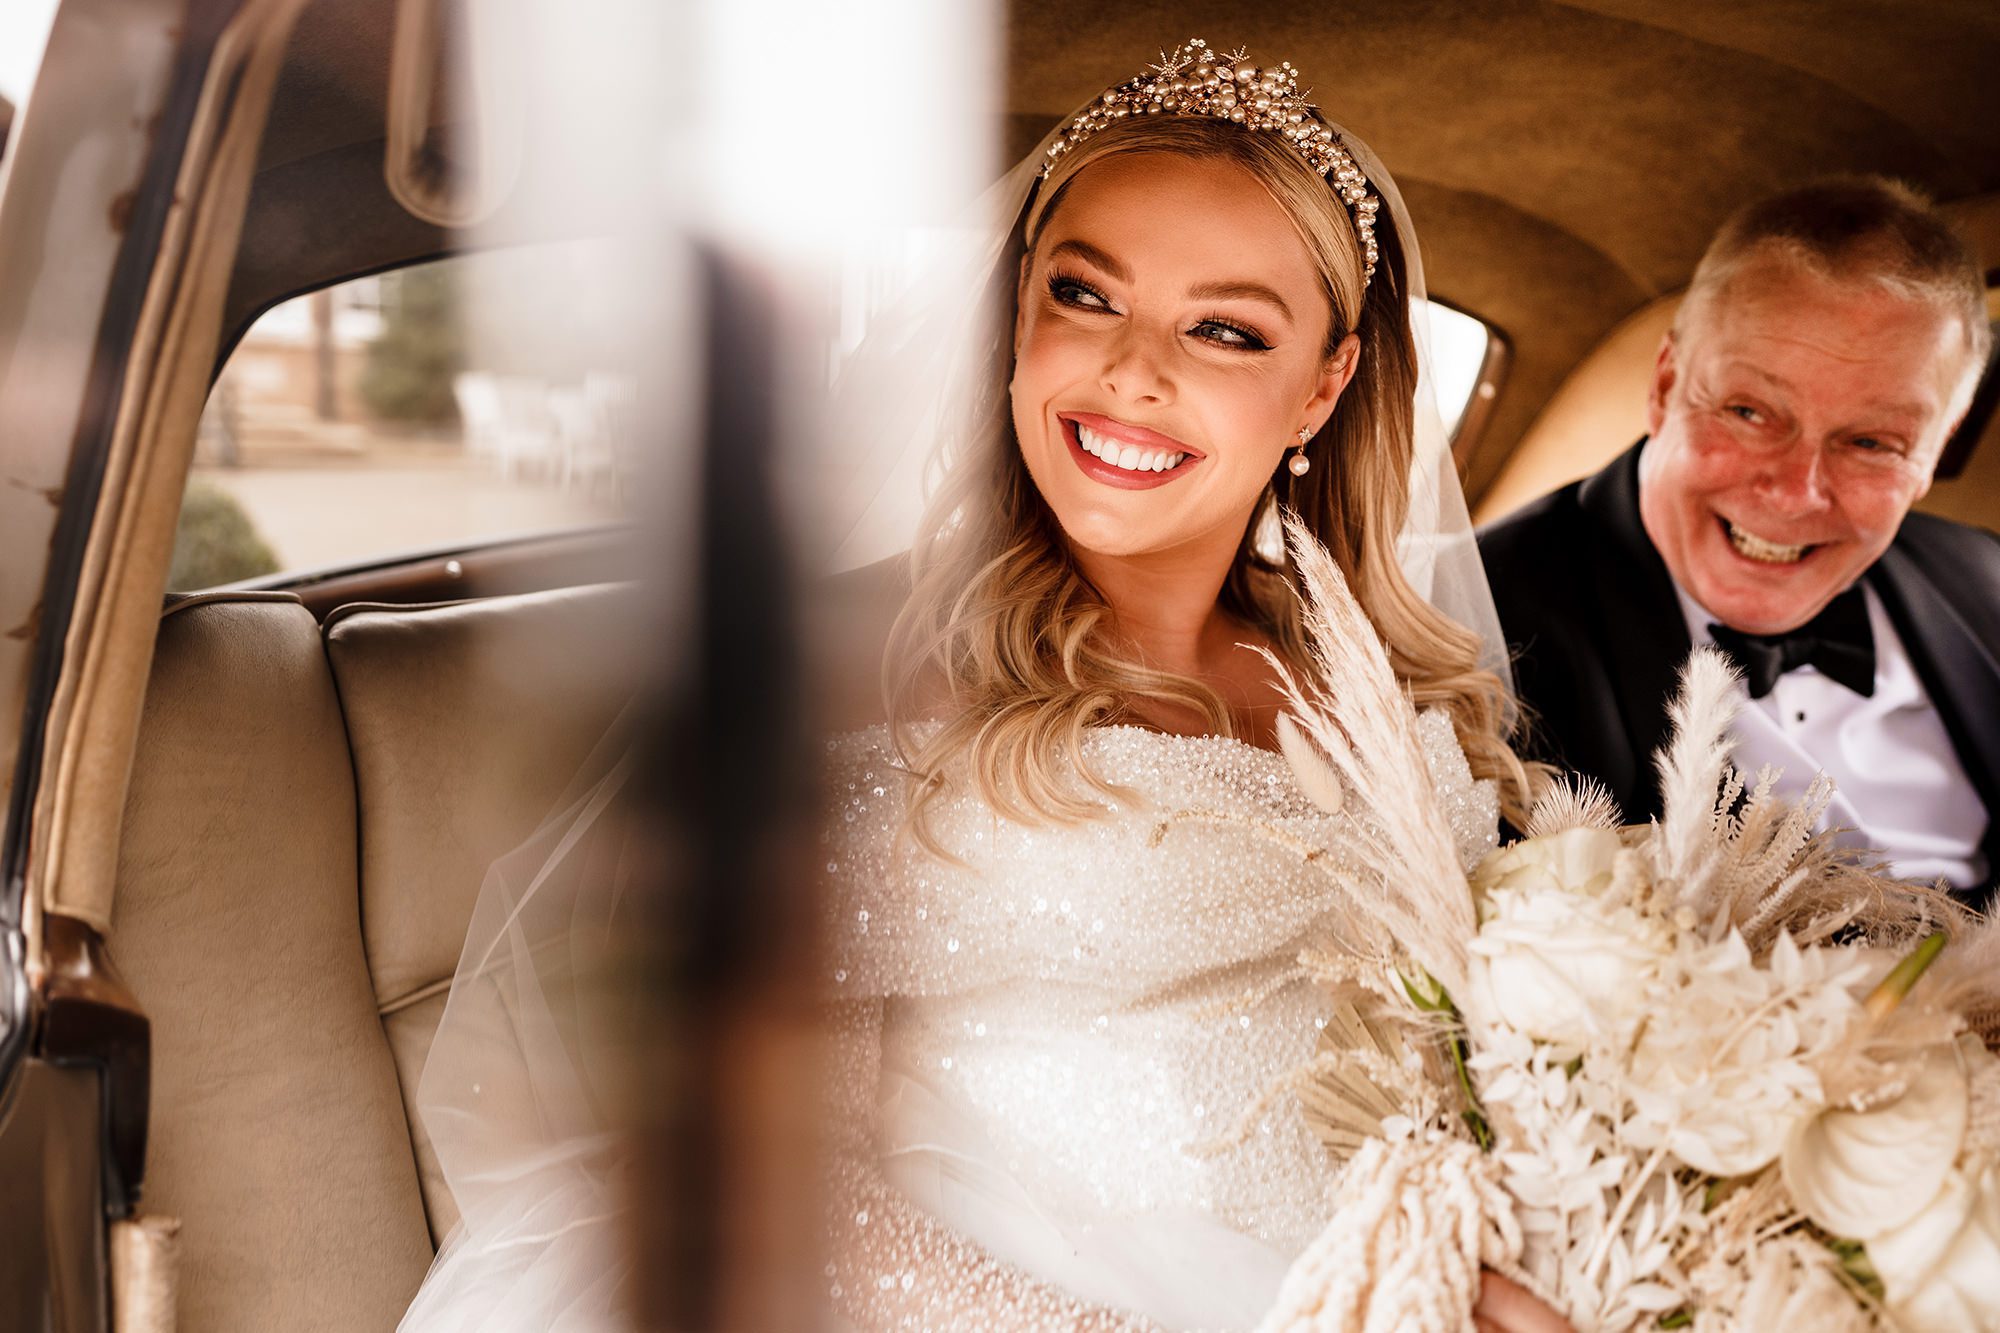 Candid Wedding Photography: Capturing Moments, Creating Memories